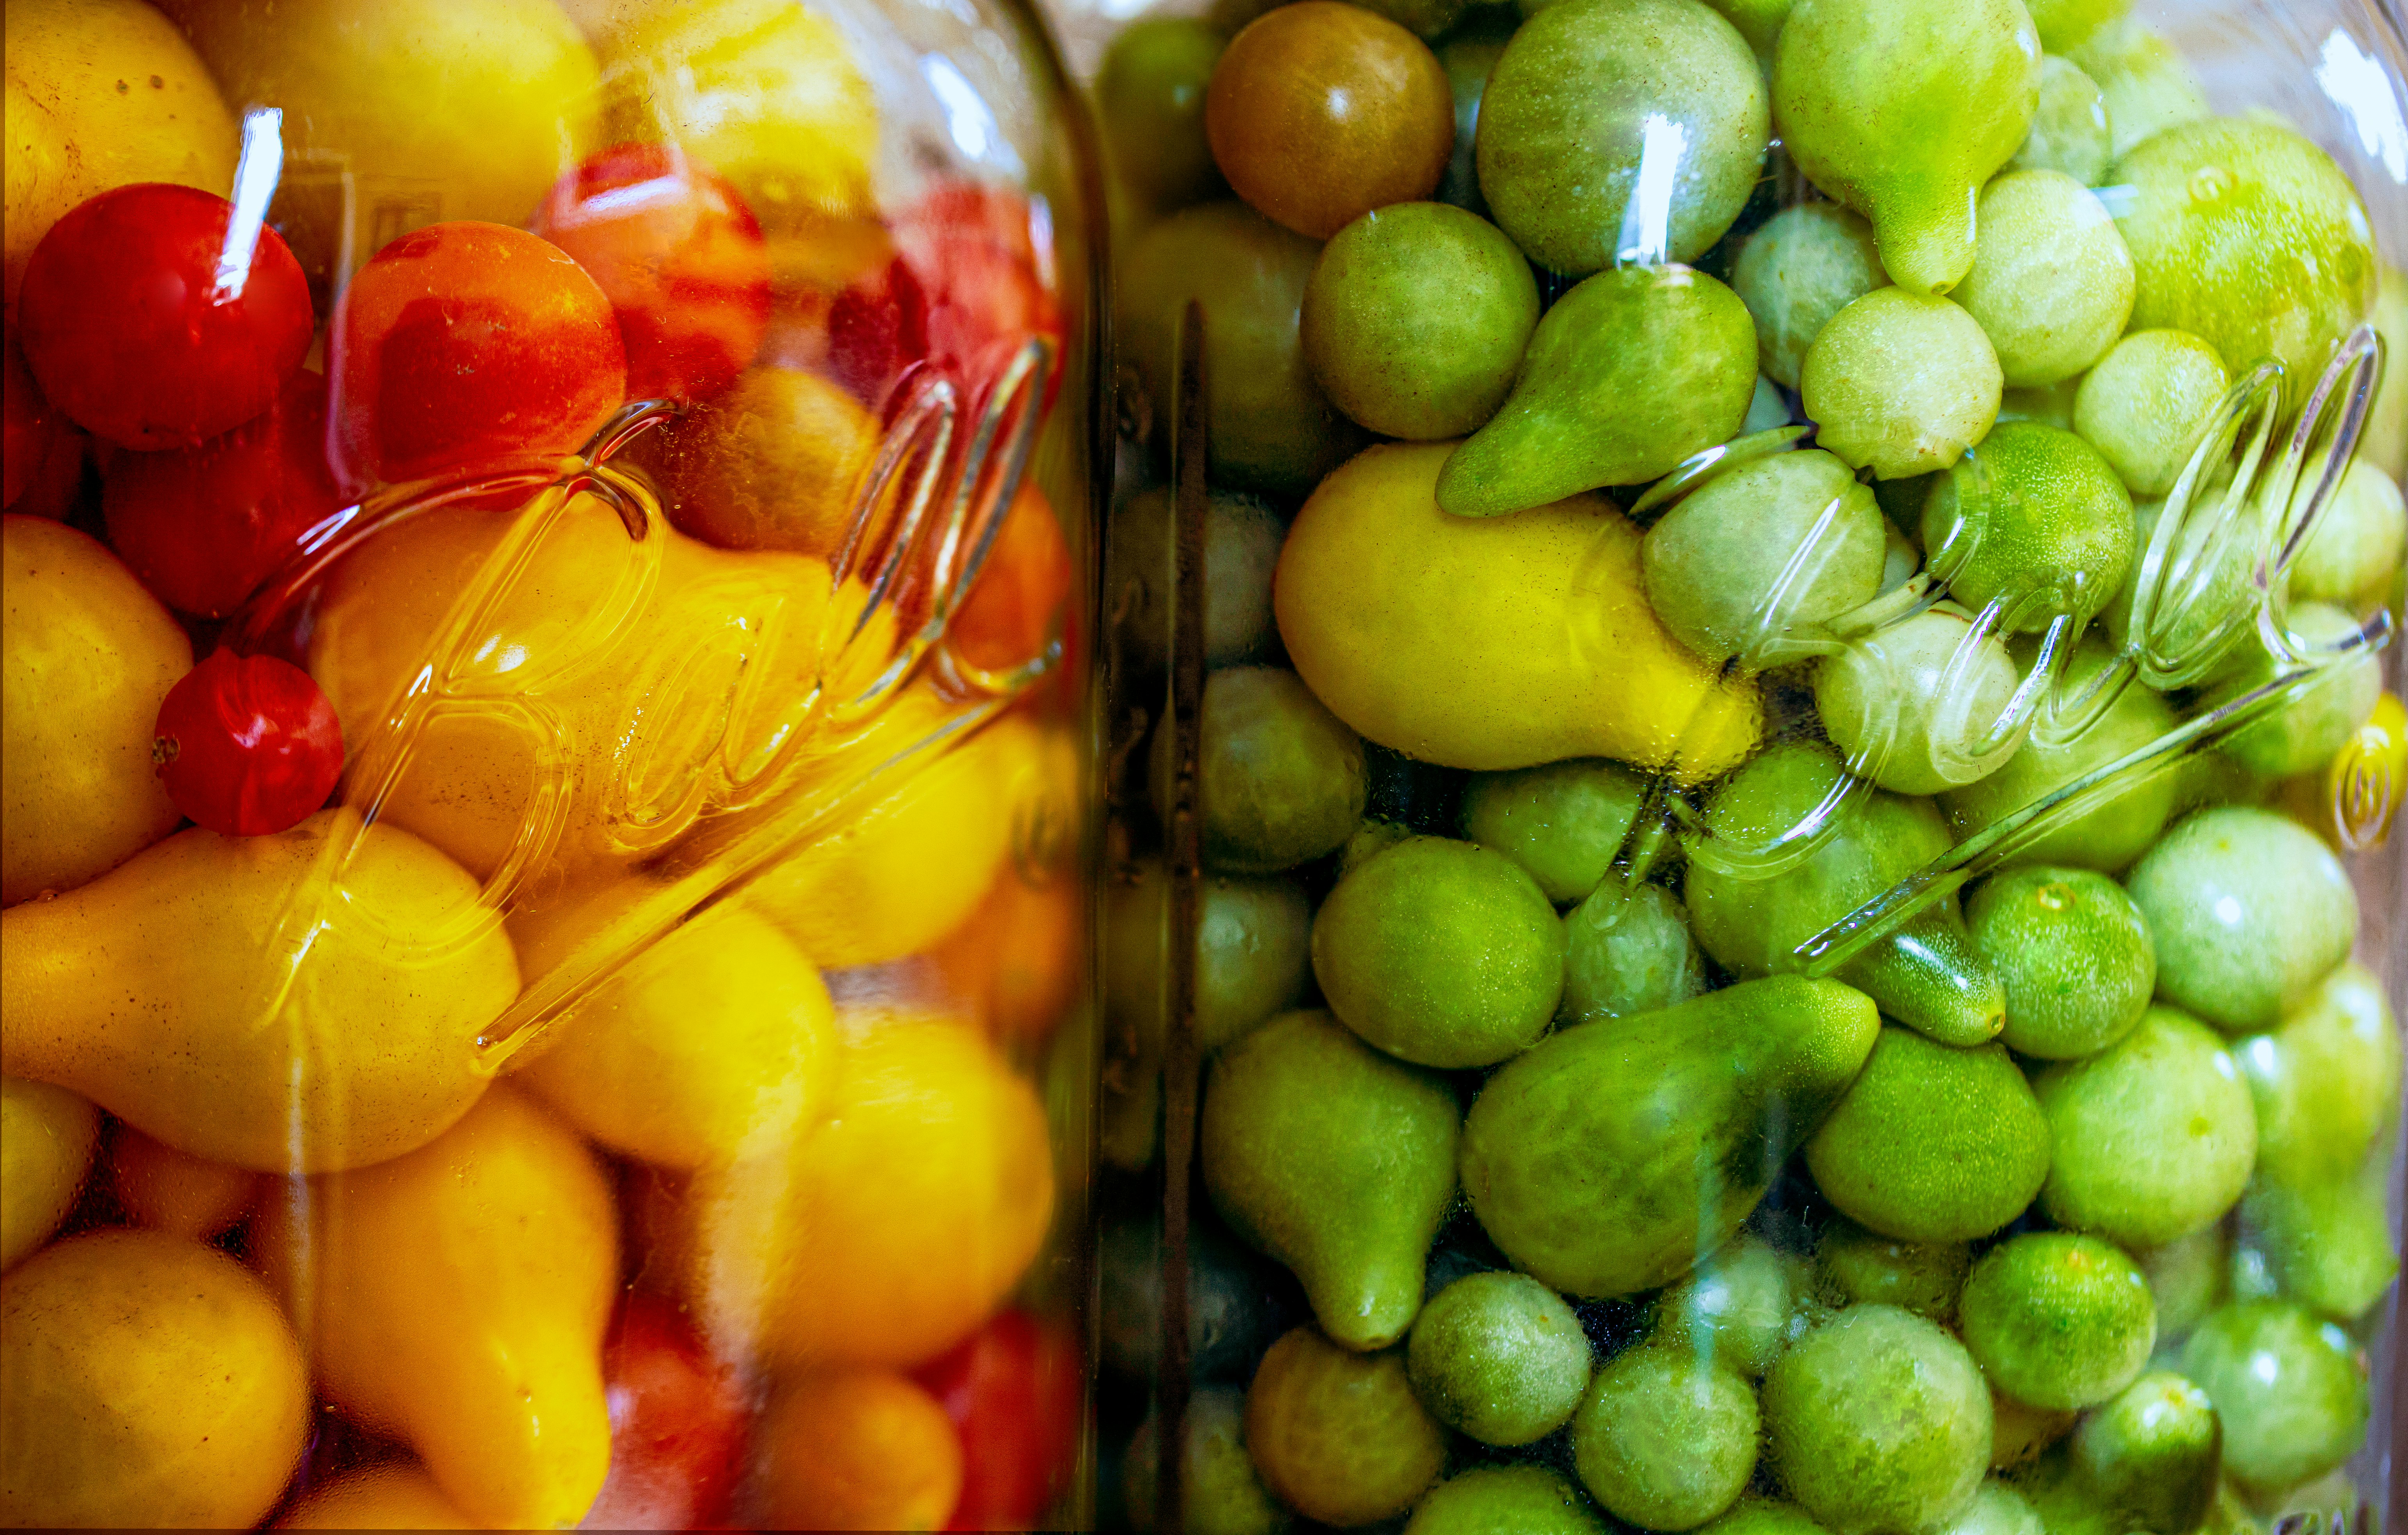 green and yellow fruits in clear glass jar